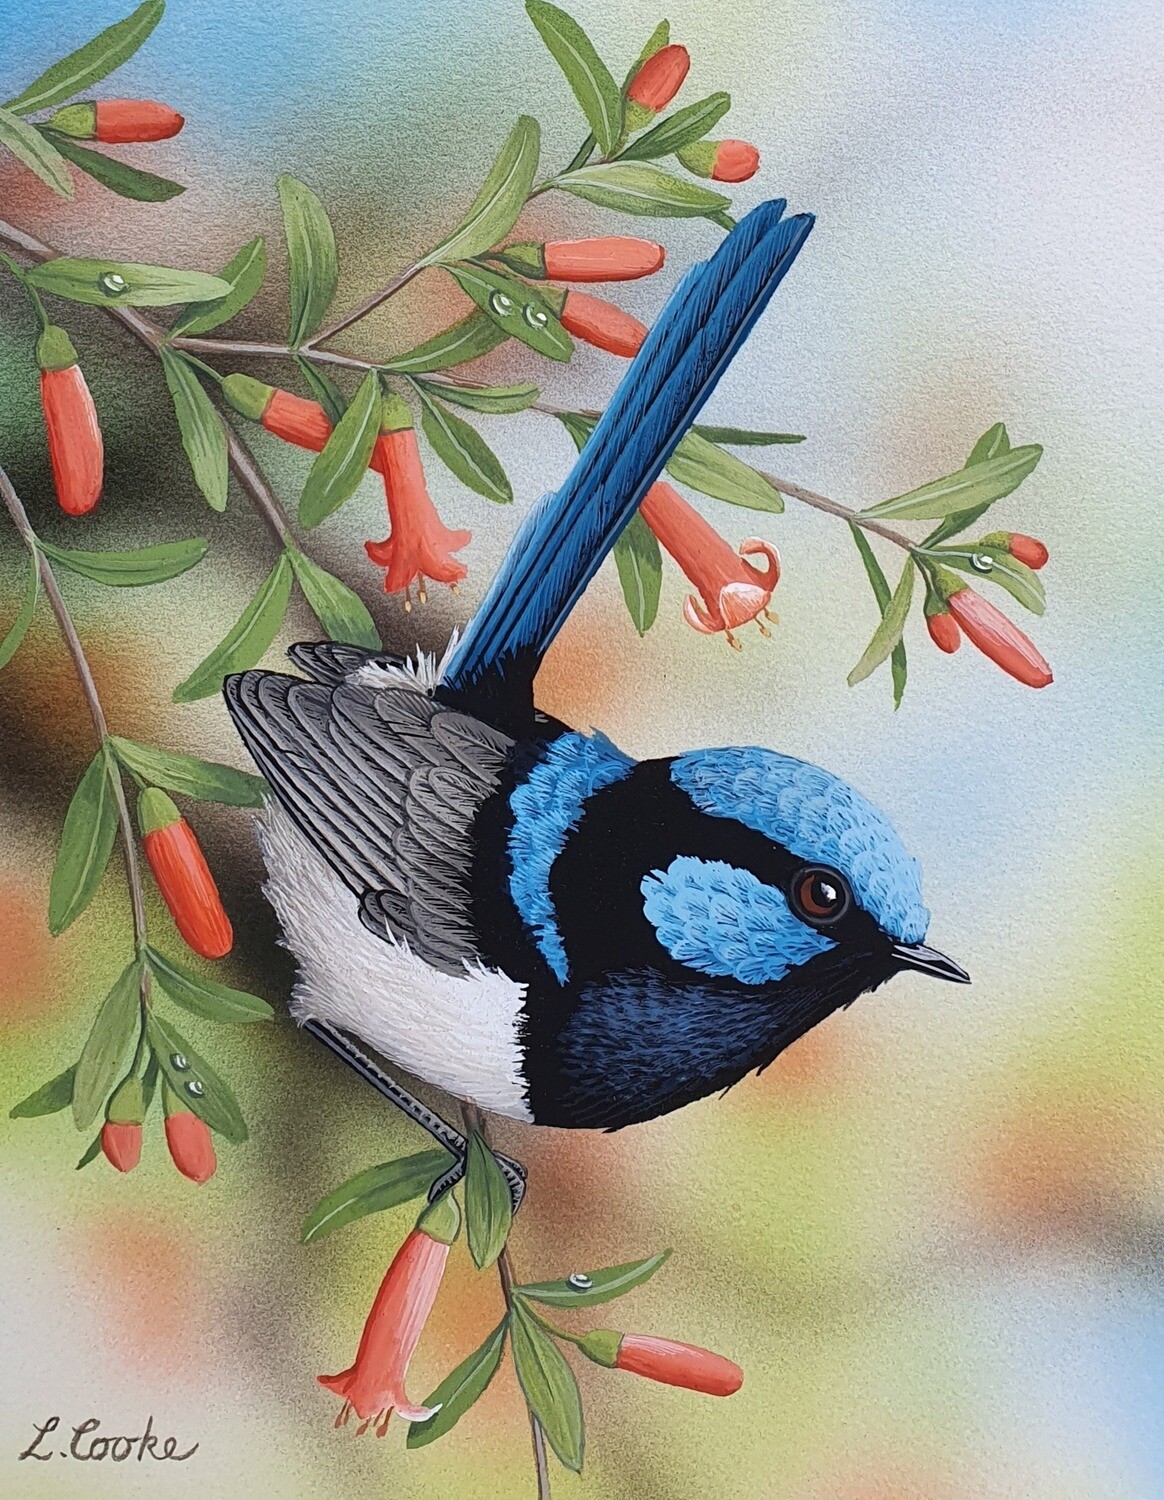 SUPERB WREN by L Cooke - Full Drill AB Kit, SQ
40 x 50cm with 40 colours (3 ABs)
- Currently in stock